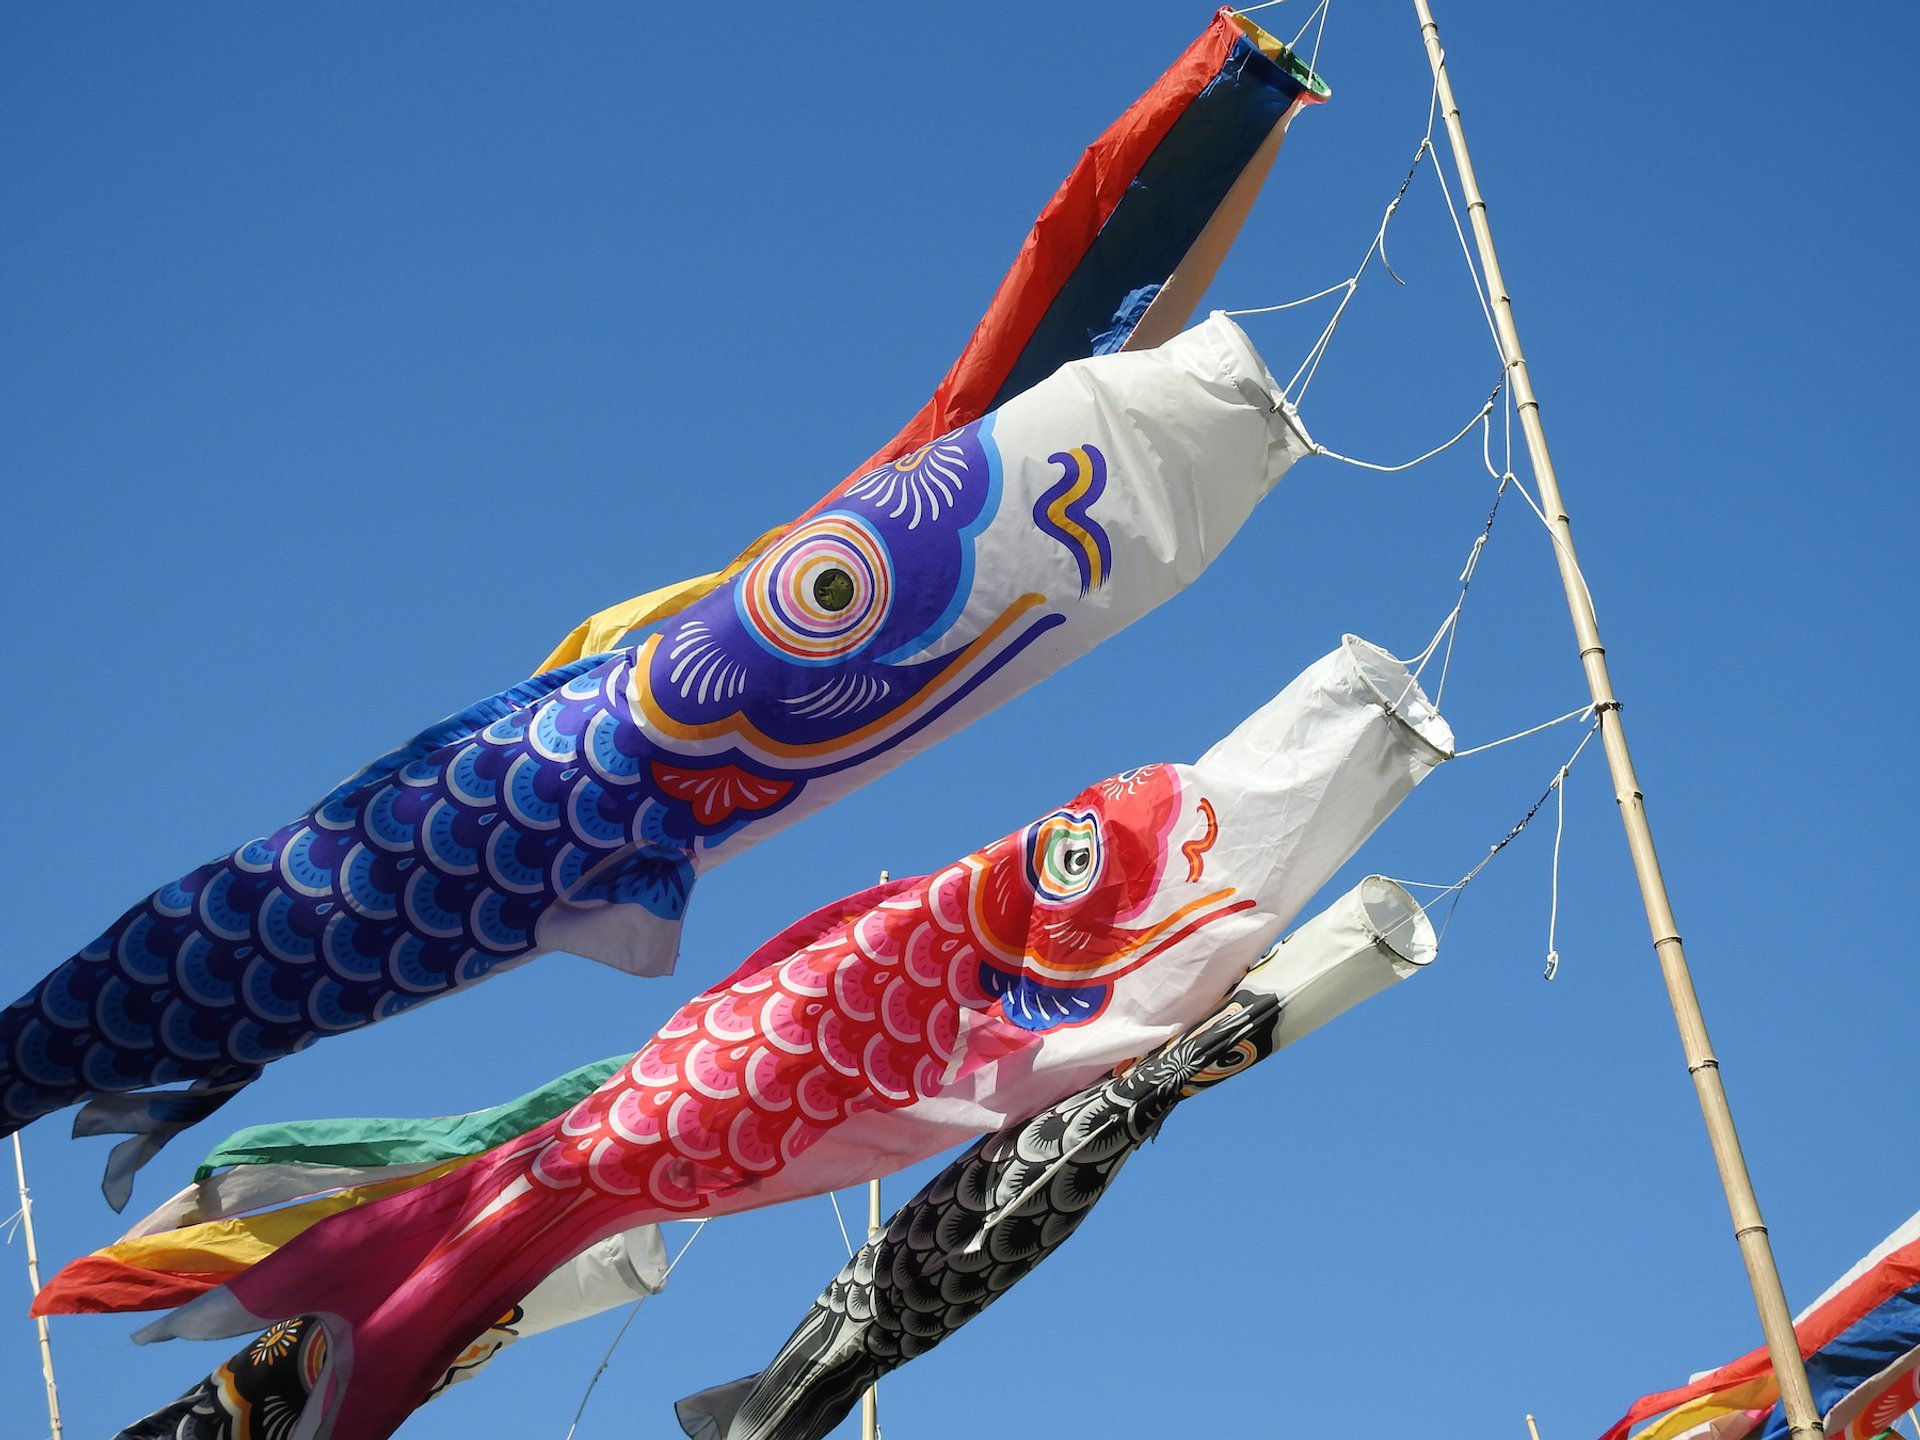 Japanese Festival 2023 in Midwest Dates